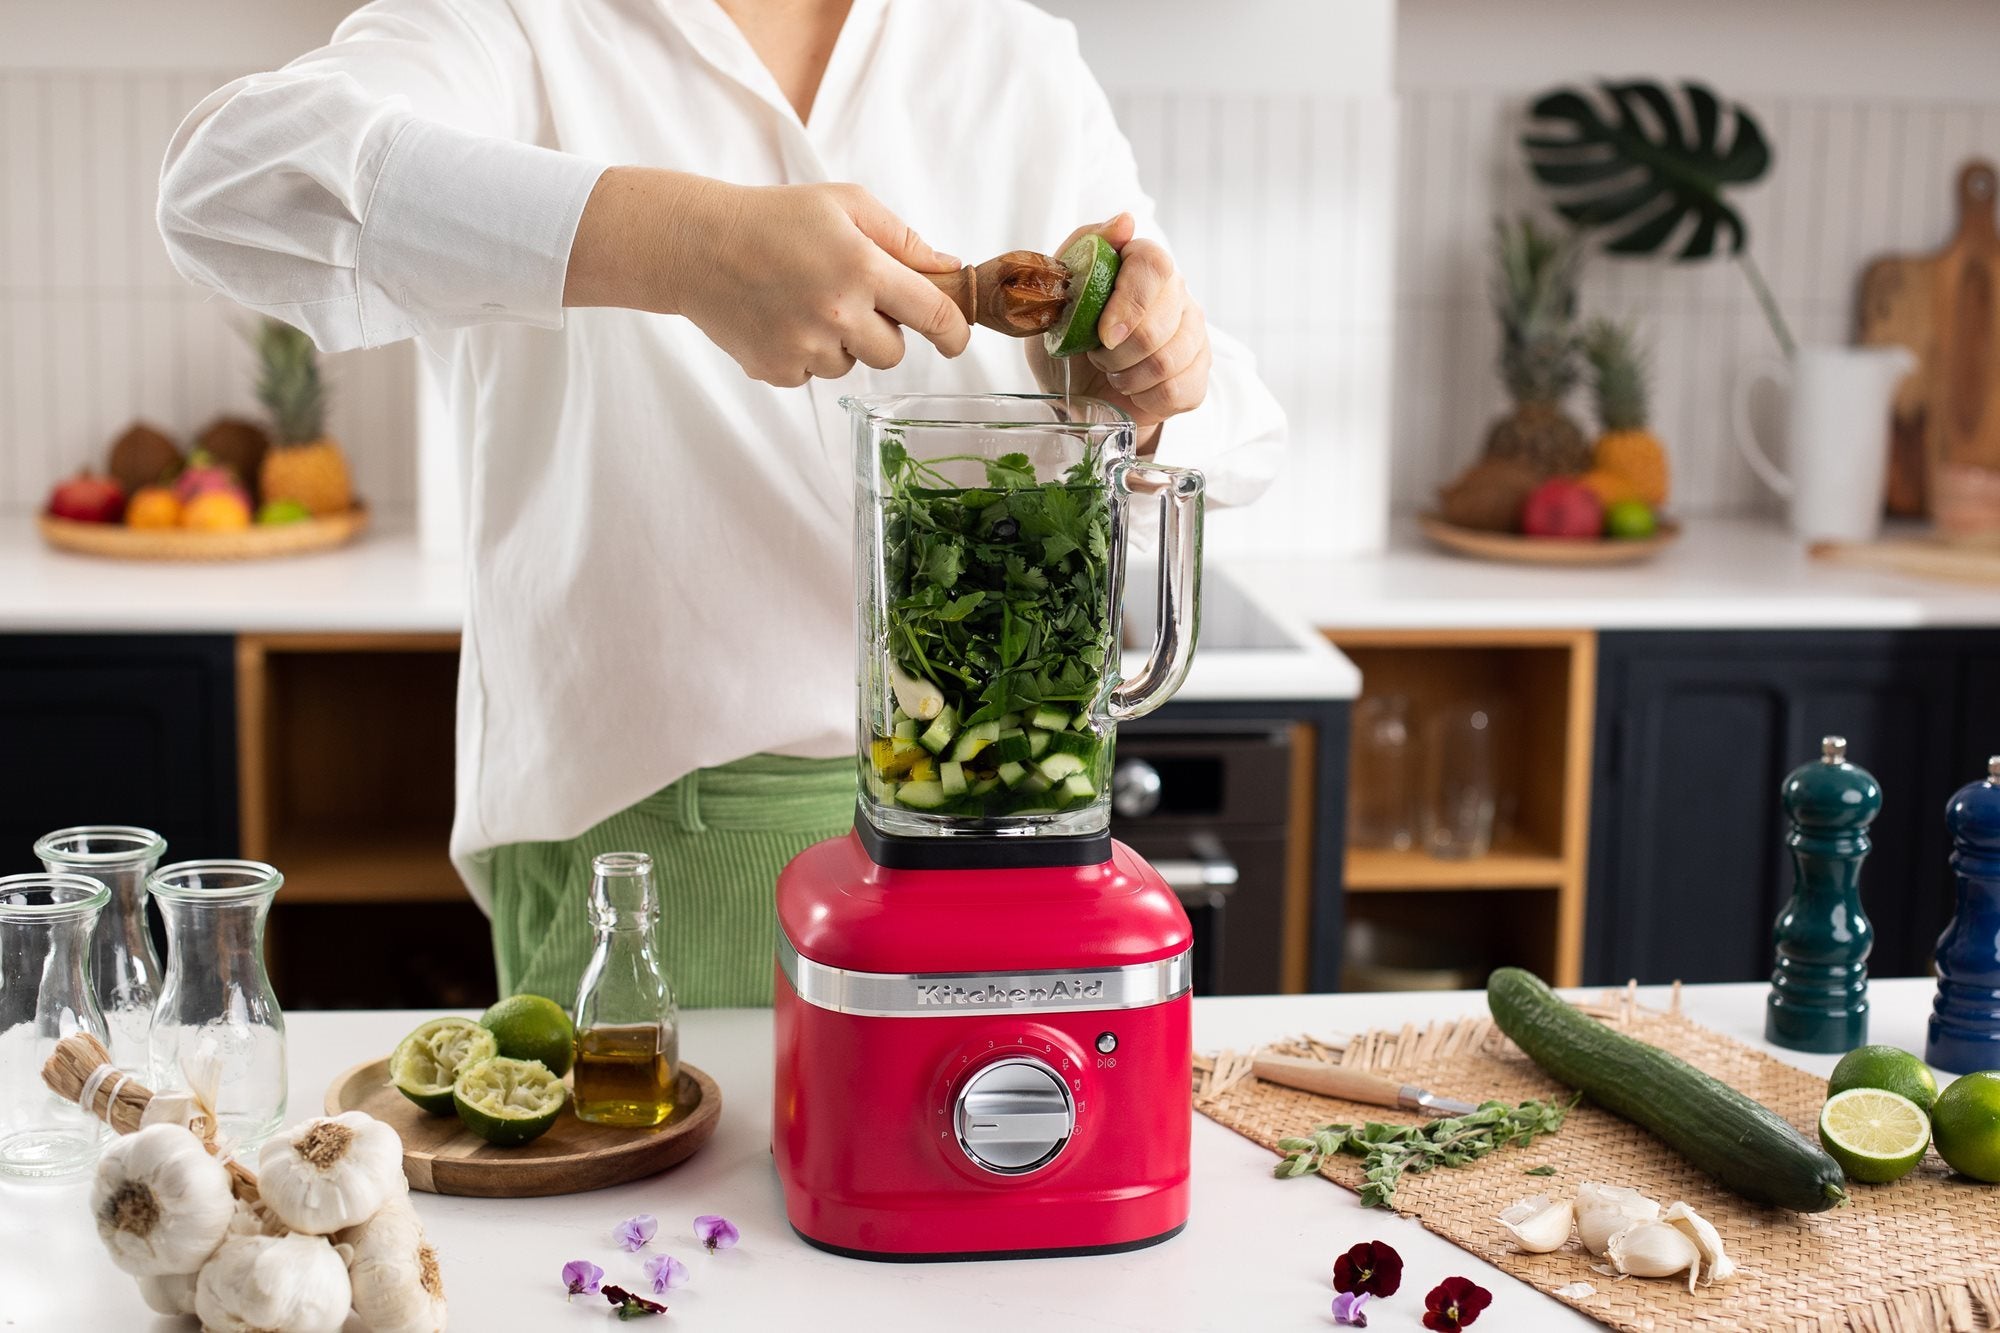 KitchenAid® Color of the Year K400 Blender, Hibiscus